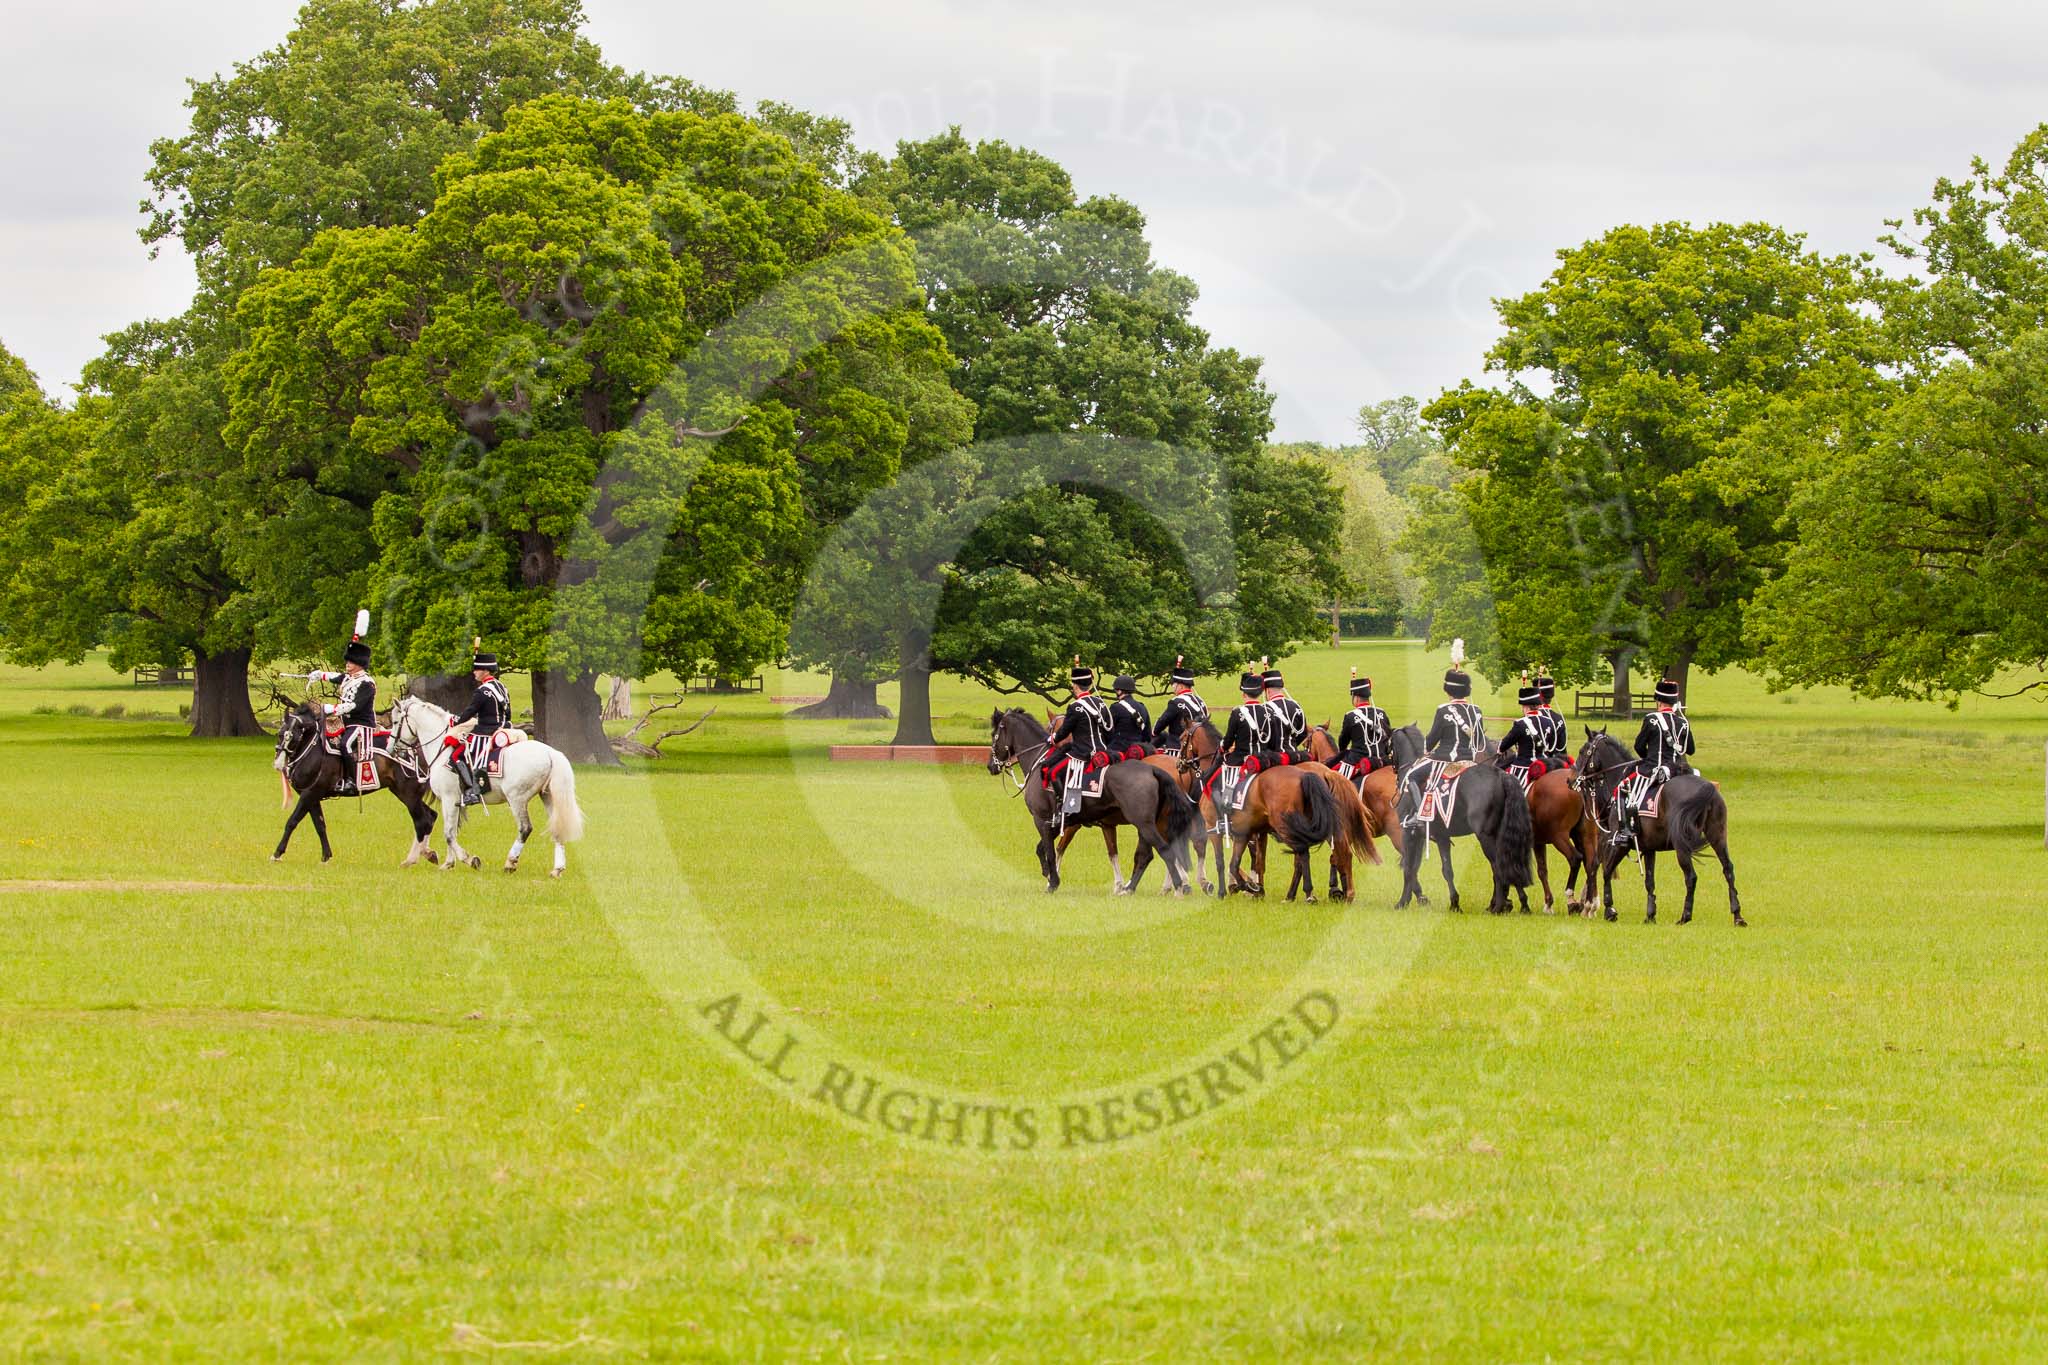 The Light Cavalry HAC Annual Review and Inspection 2013.
Windsor Great Park Review Ground,
Windsor,
Berkshire,
United Kingdom,
on 09 June 2013 at 13:34, image #422